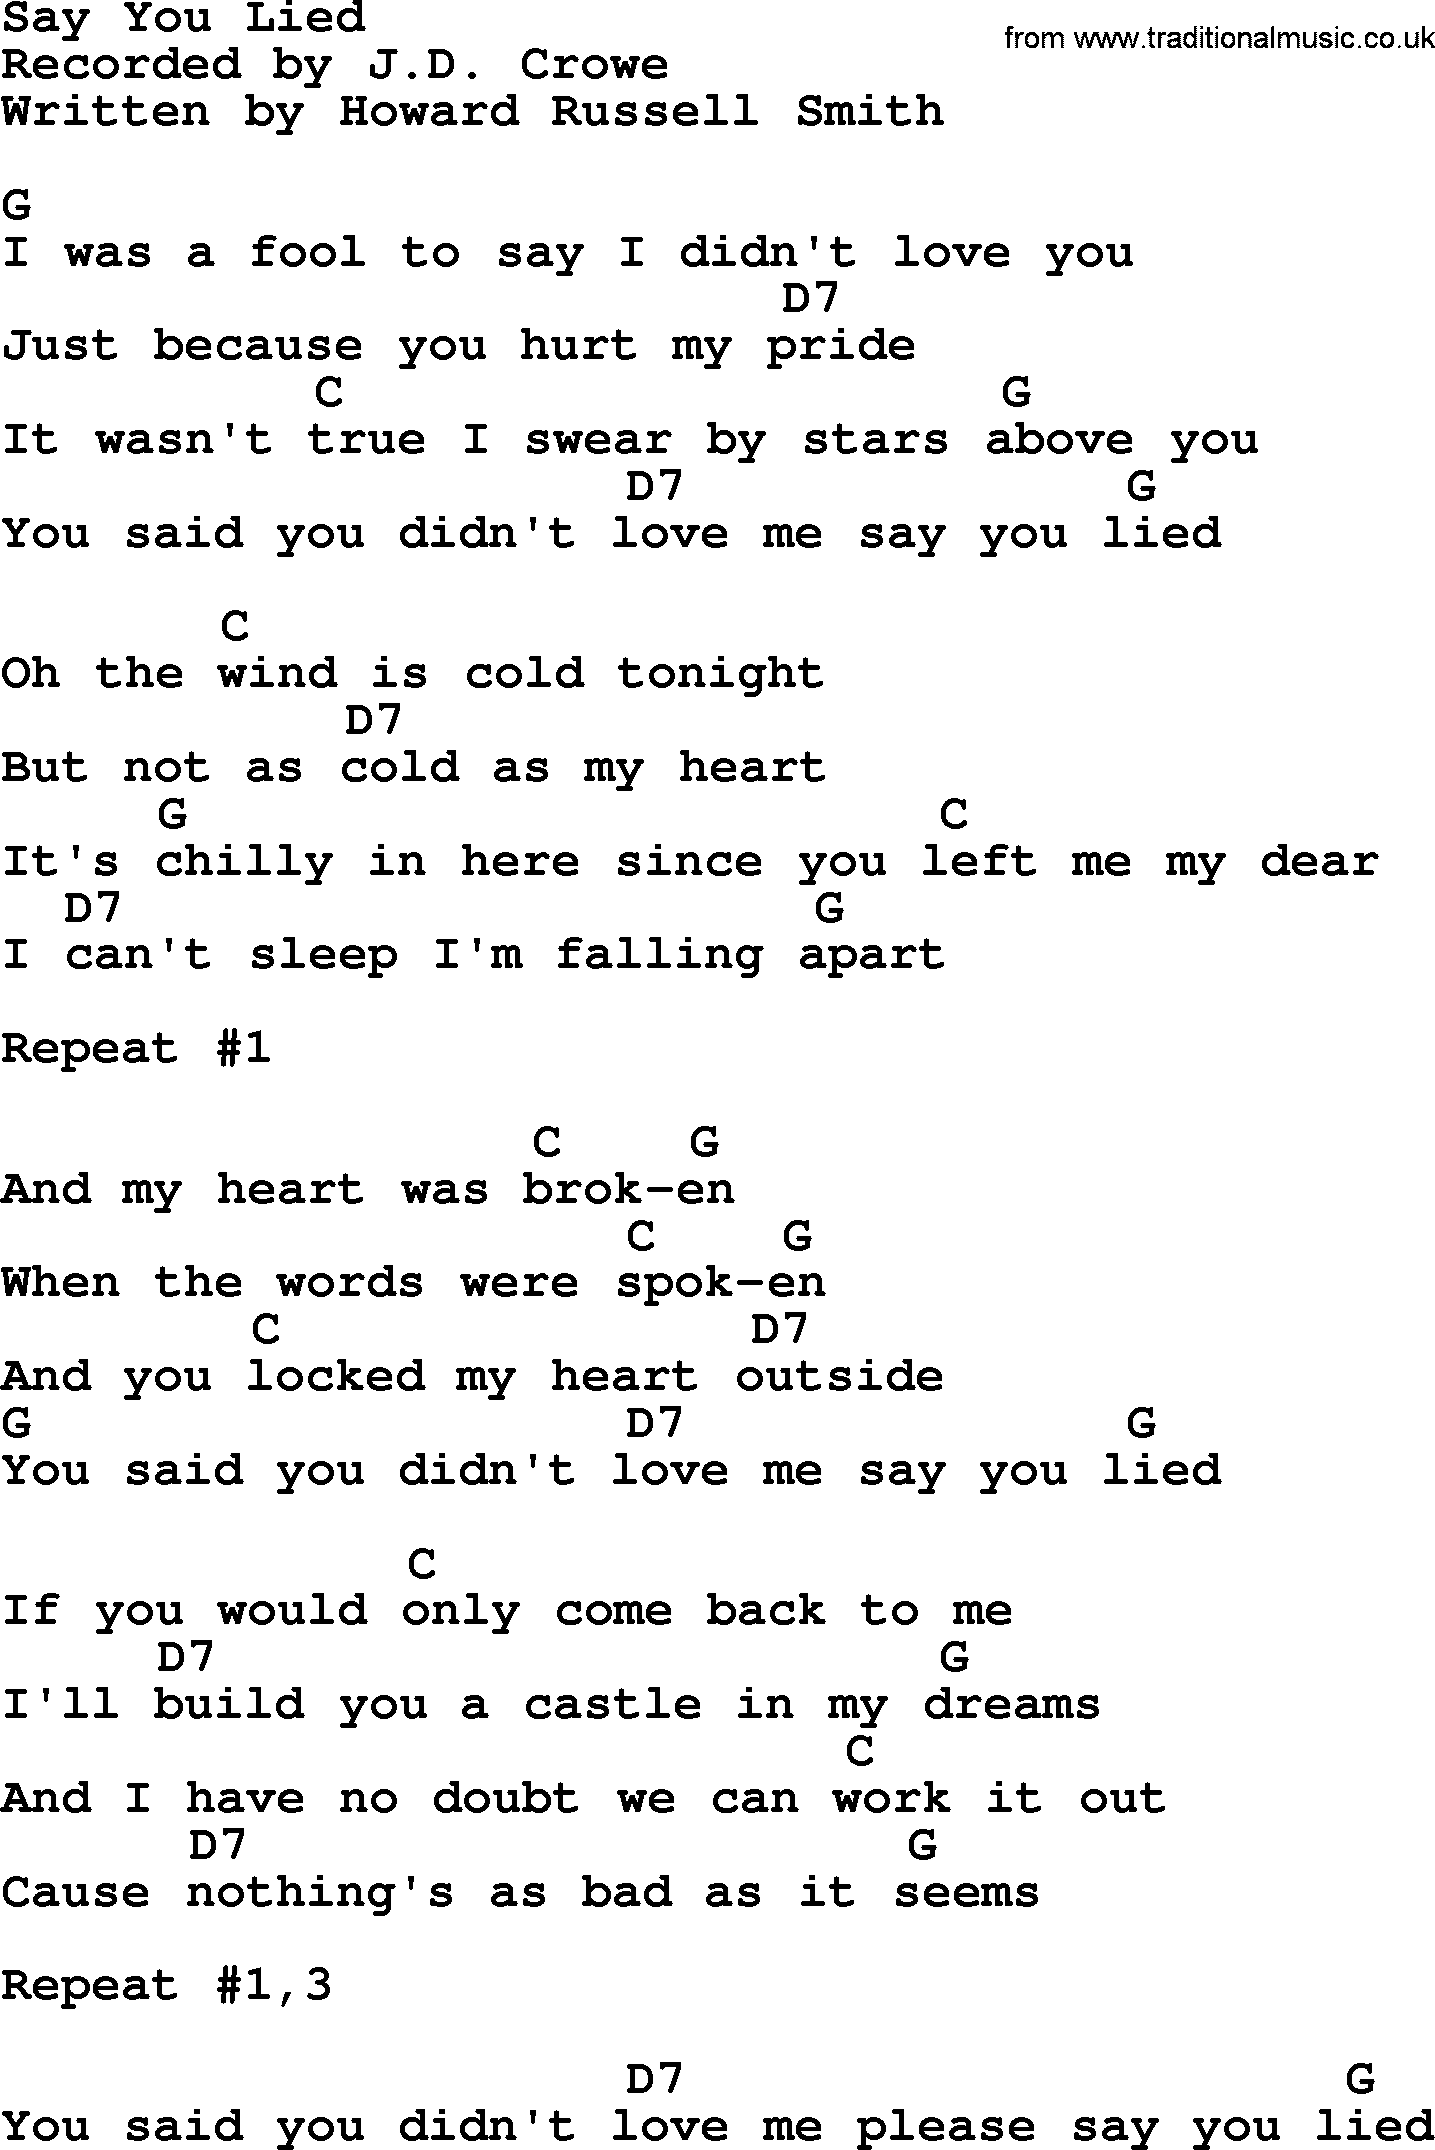 Bluegrass song: Say You Lied, lyrics and chords